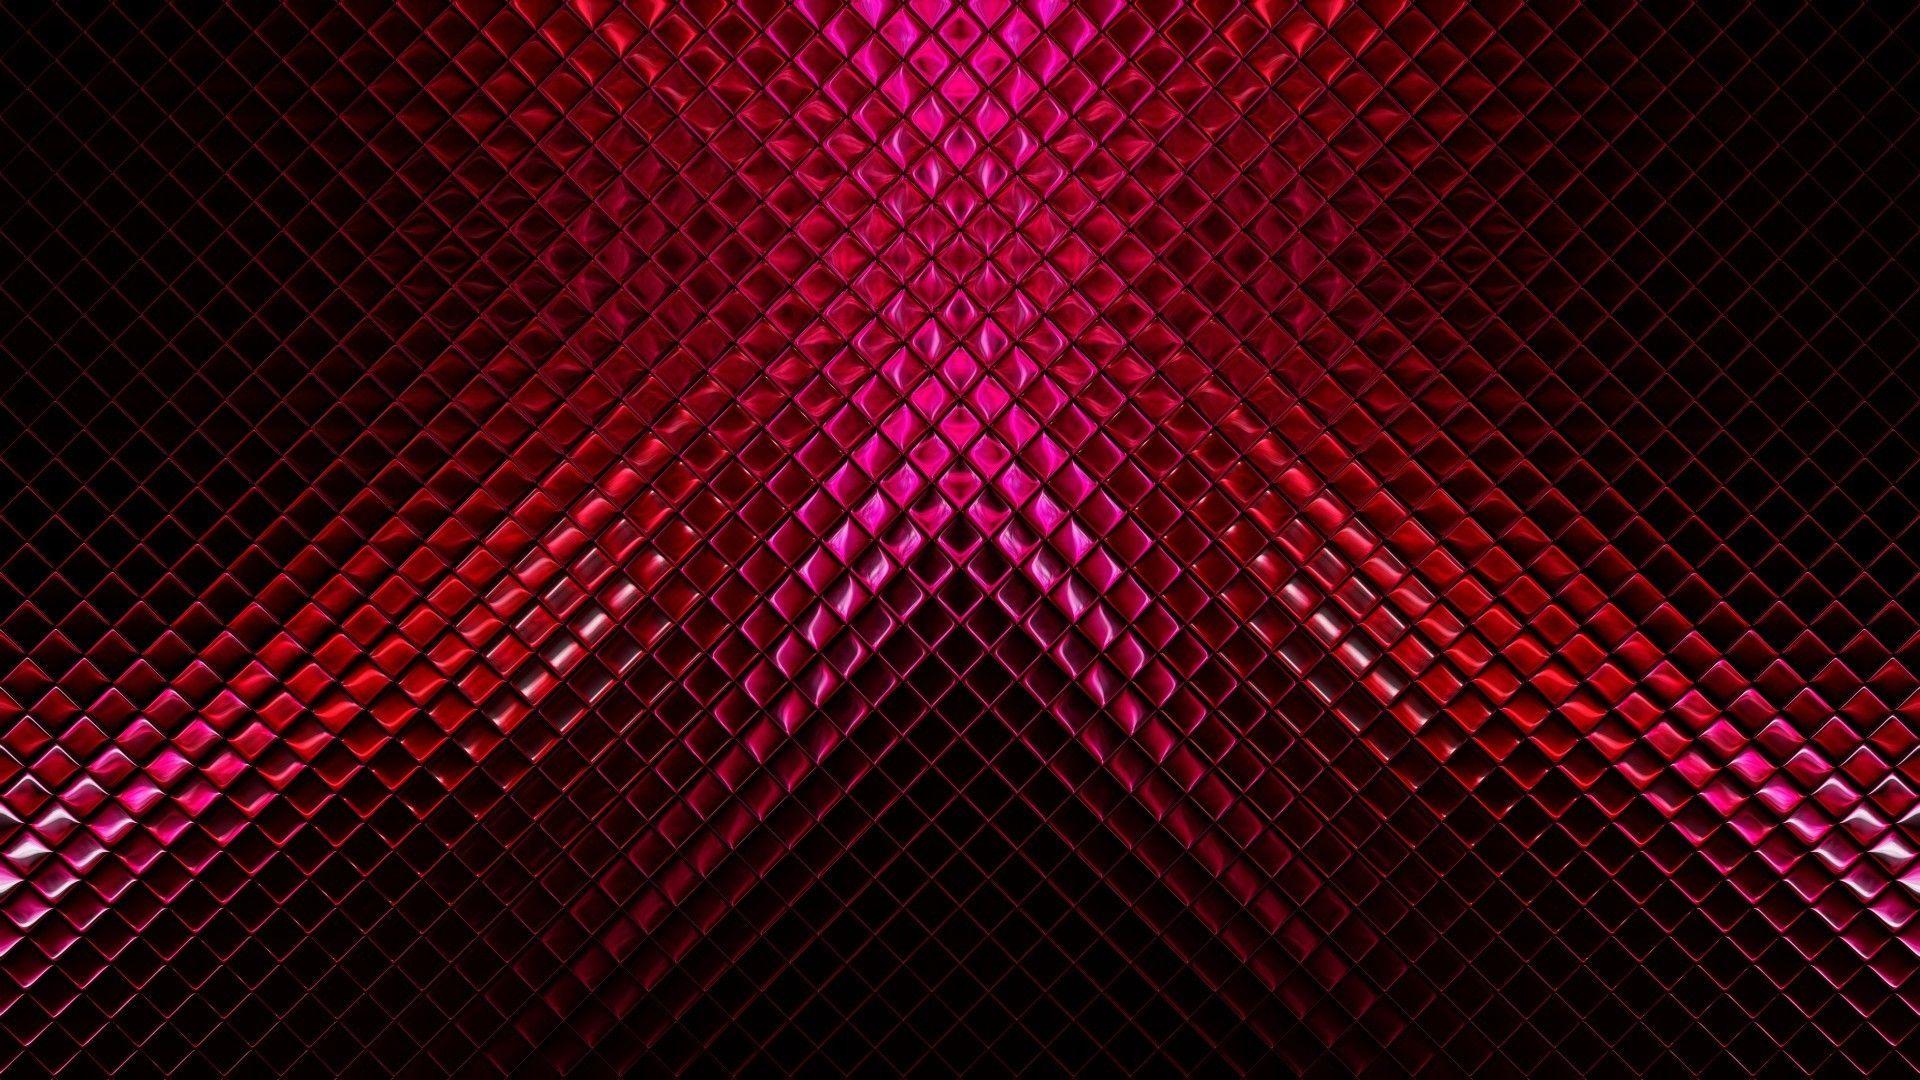 Metal Abstract Wallpapers - Top Free Metal Abstract Backgrounds ...